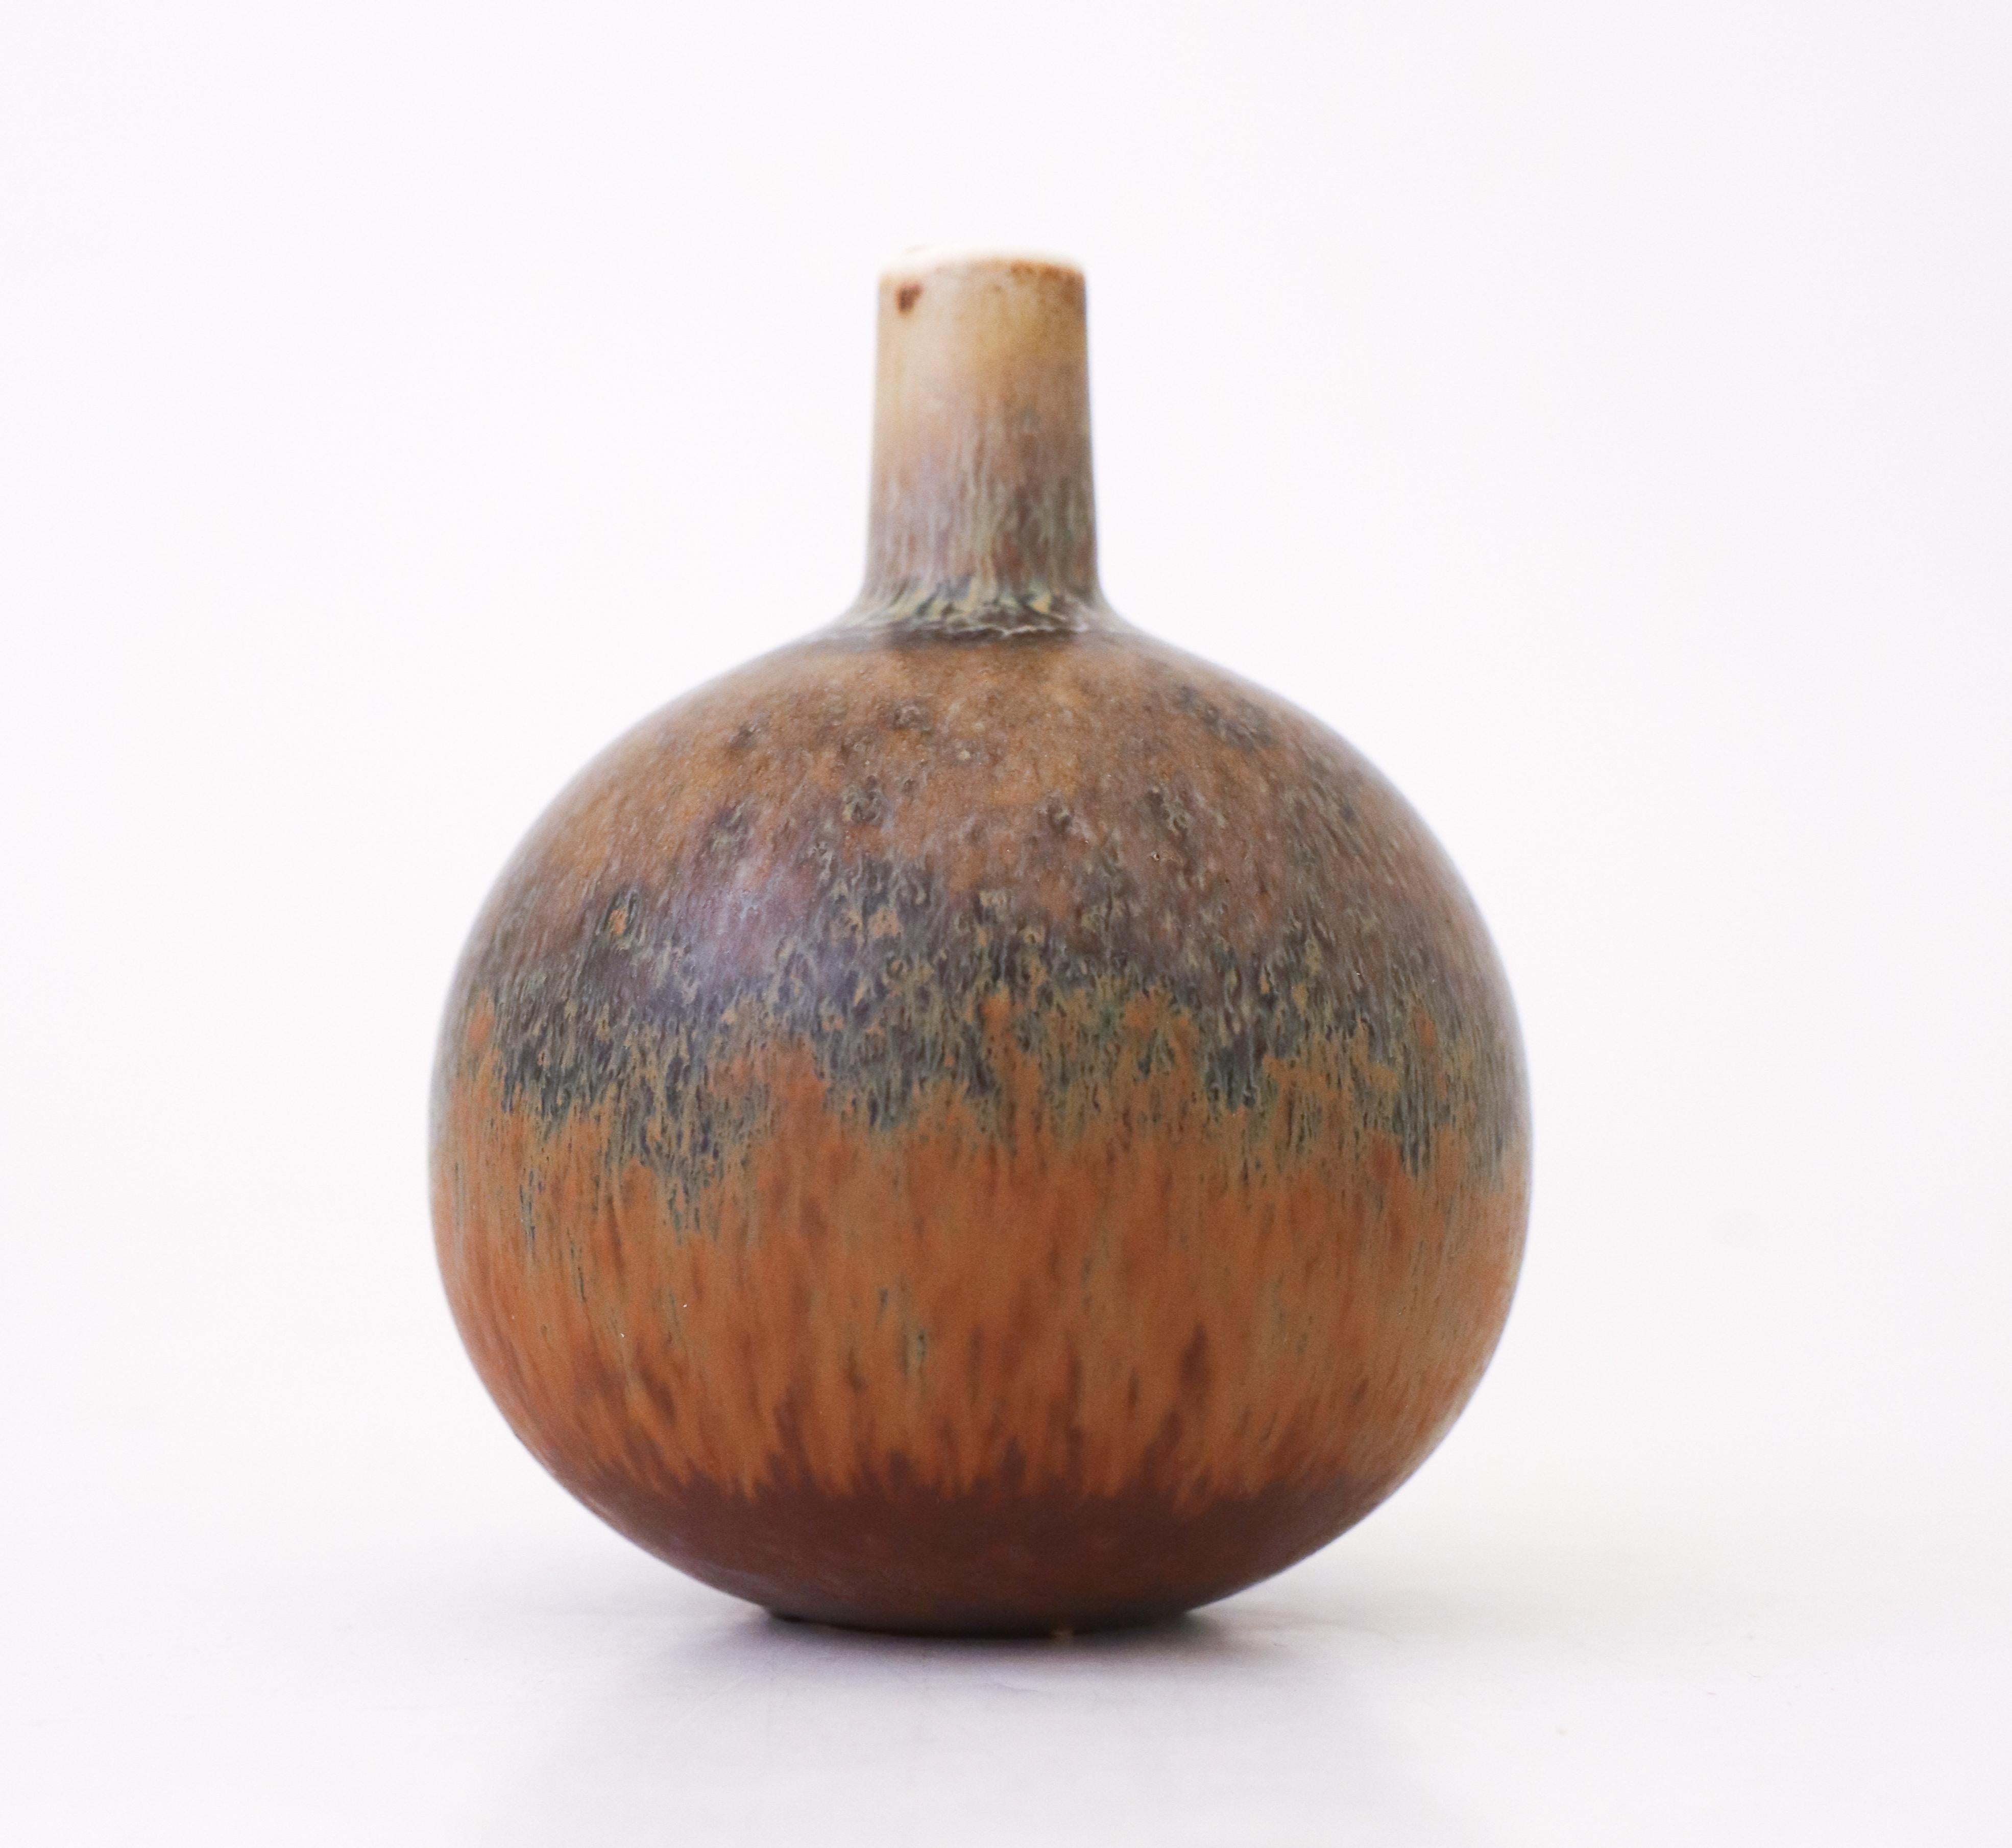 A ceramic vase with a lovely brown glaze designed by Carl-Harry Stålhane at Rörstrand. The vase is 12.5 cm (5